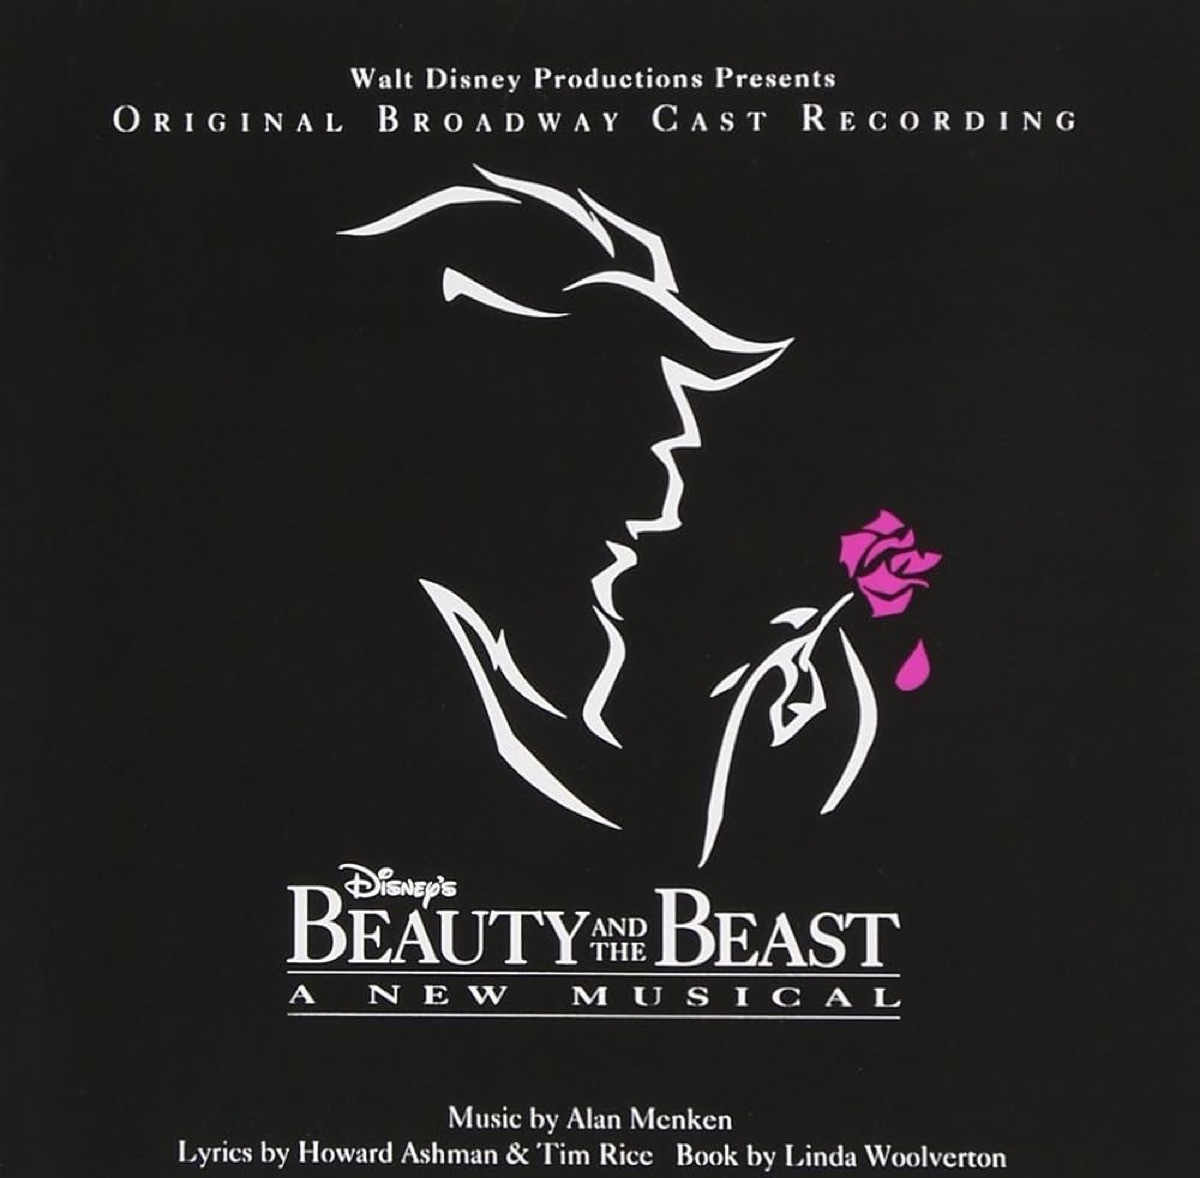 Beauty and the Beast cast recording